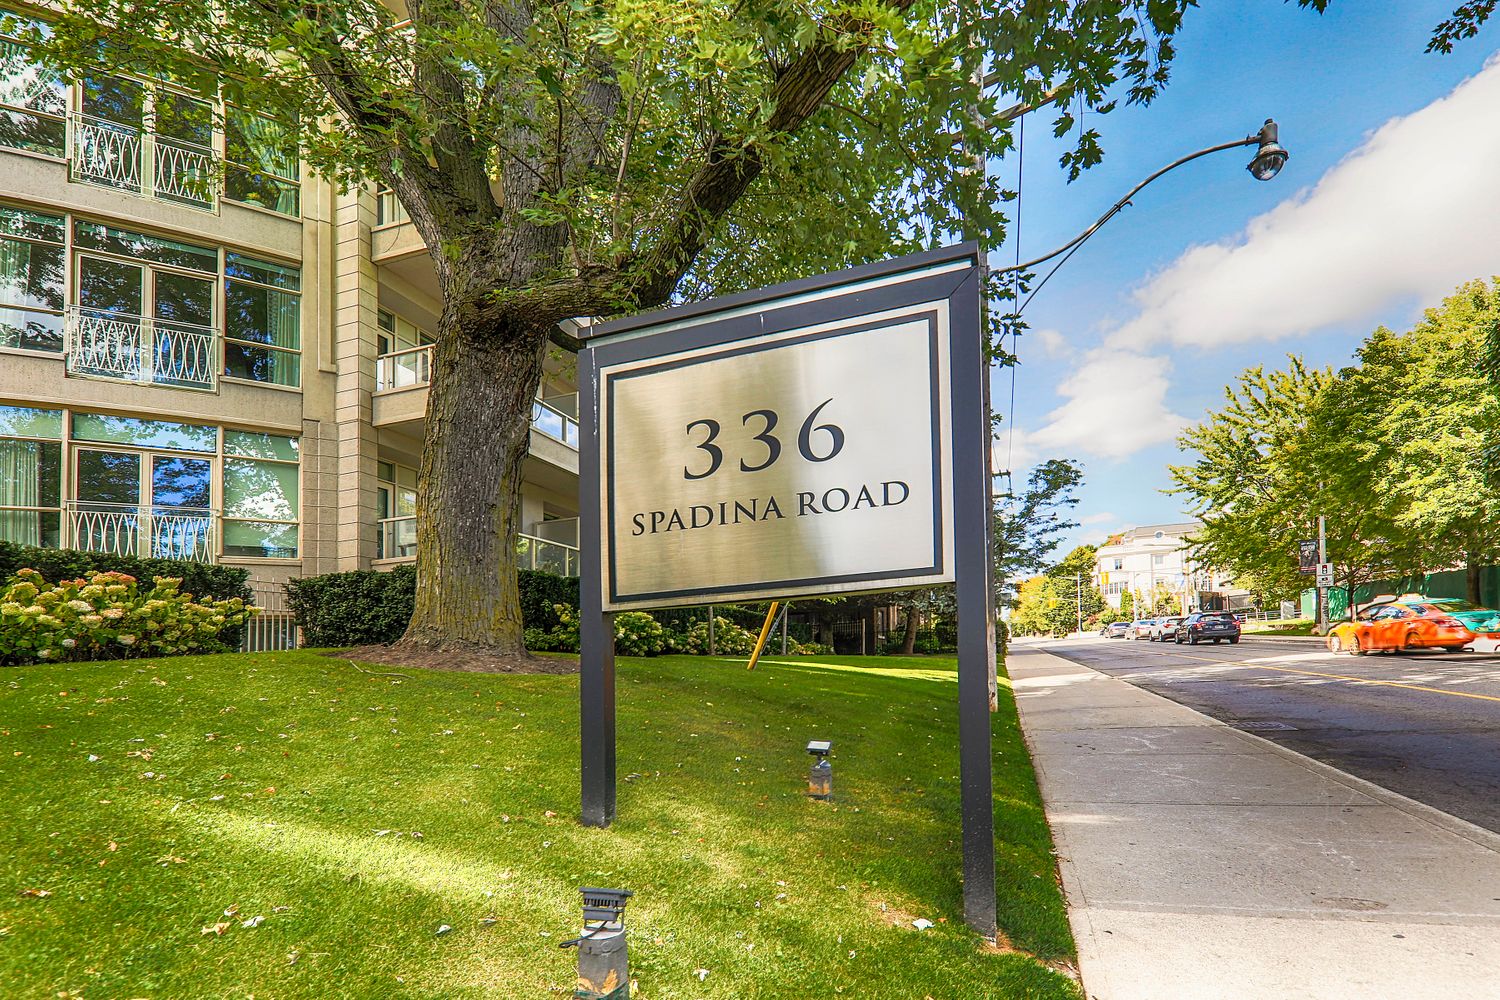 336 Spadina Road. Churchill Park Condos is located in  Midtown, Toronto - image #4 of 4